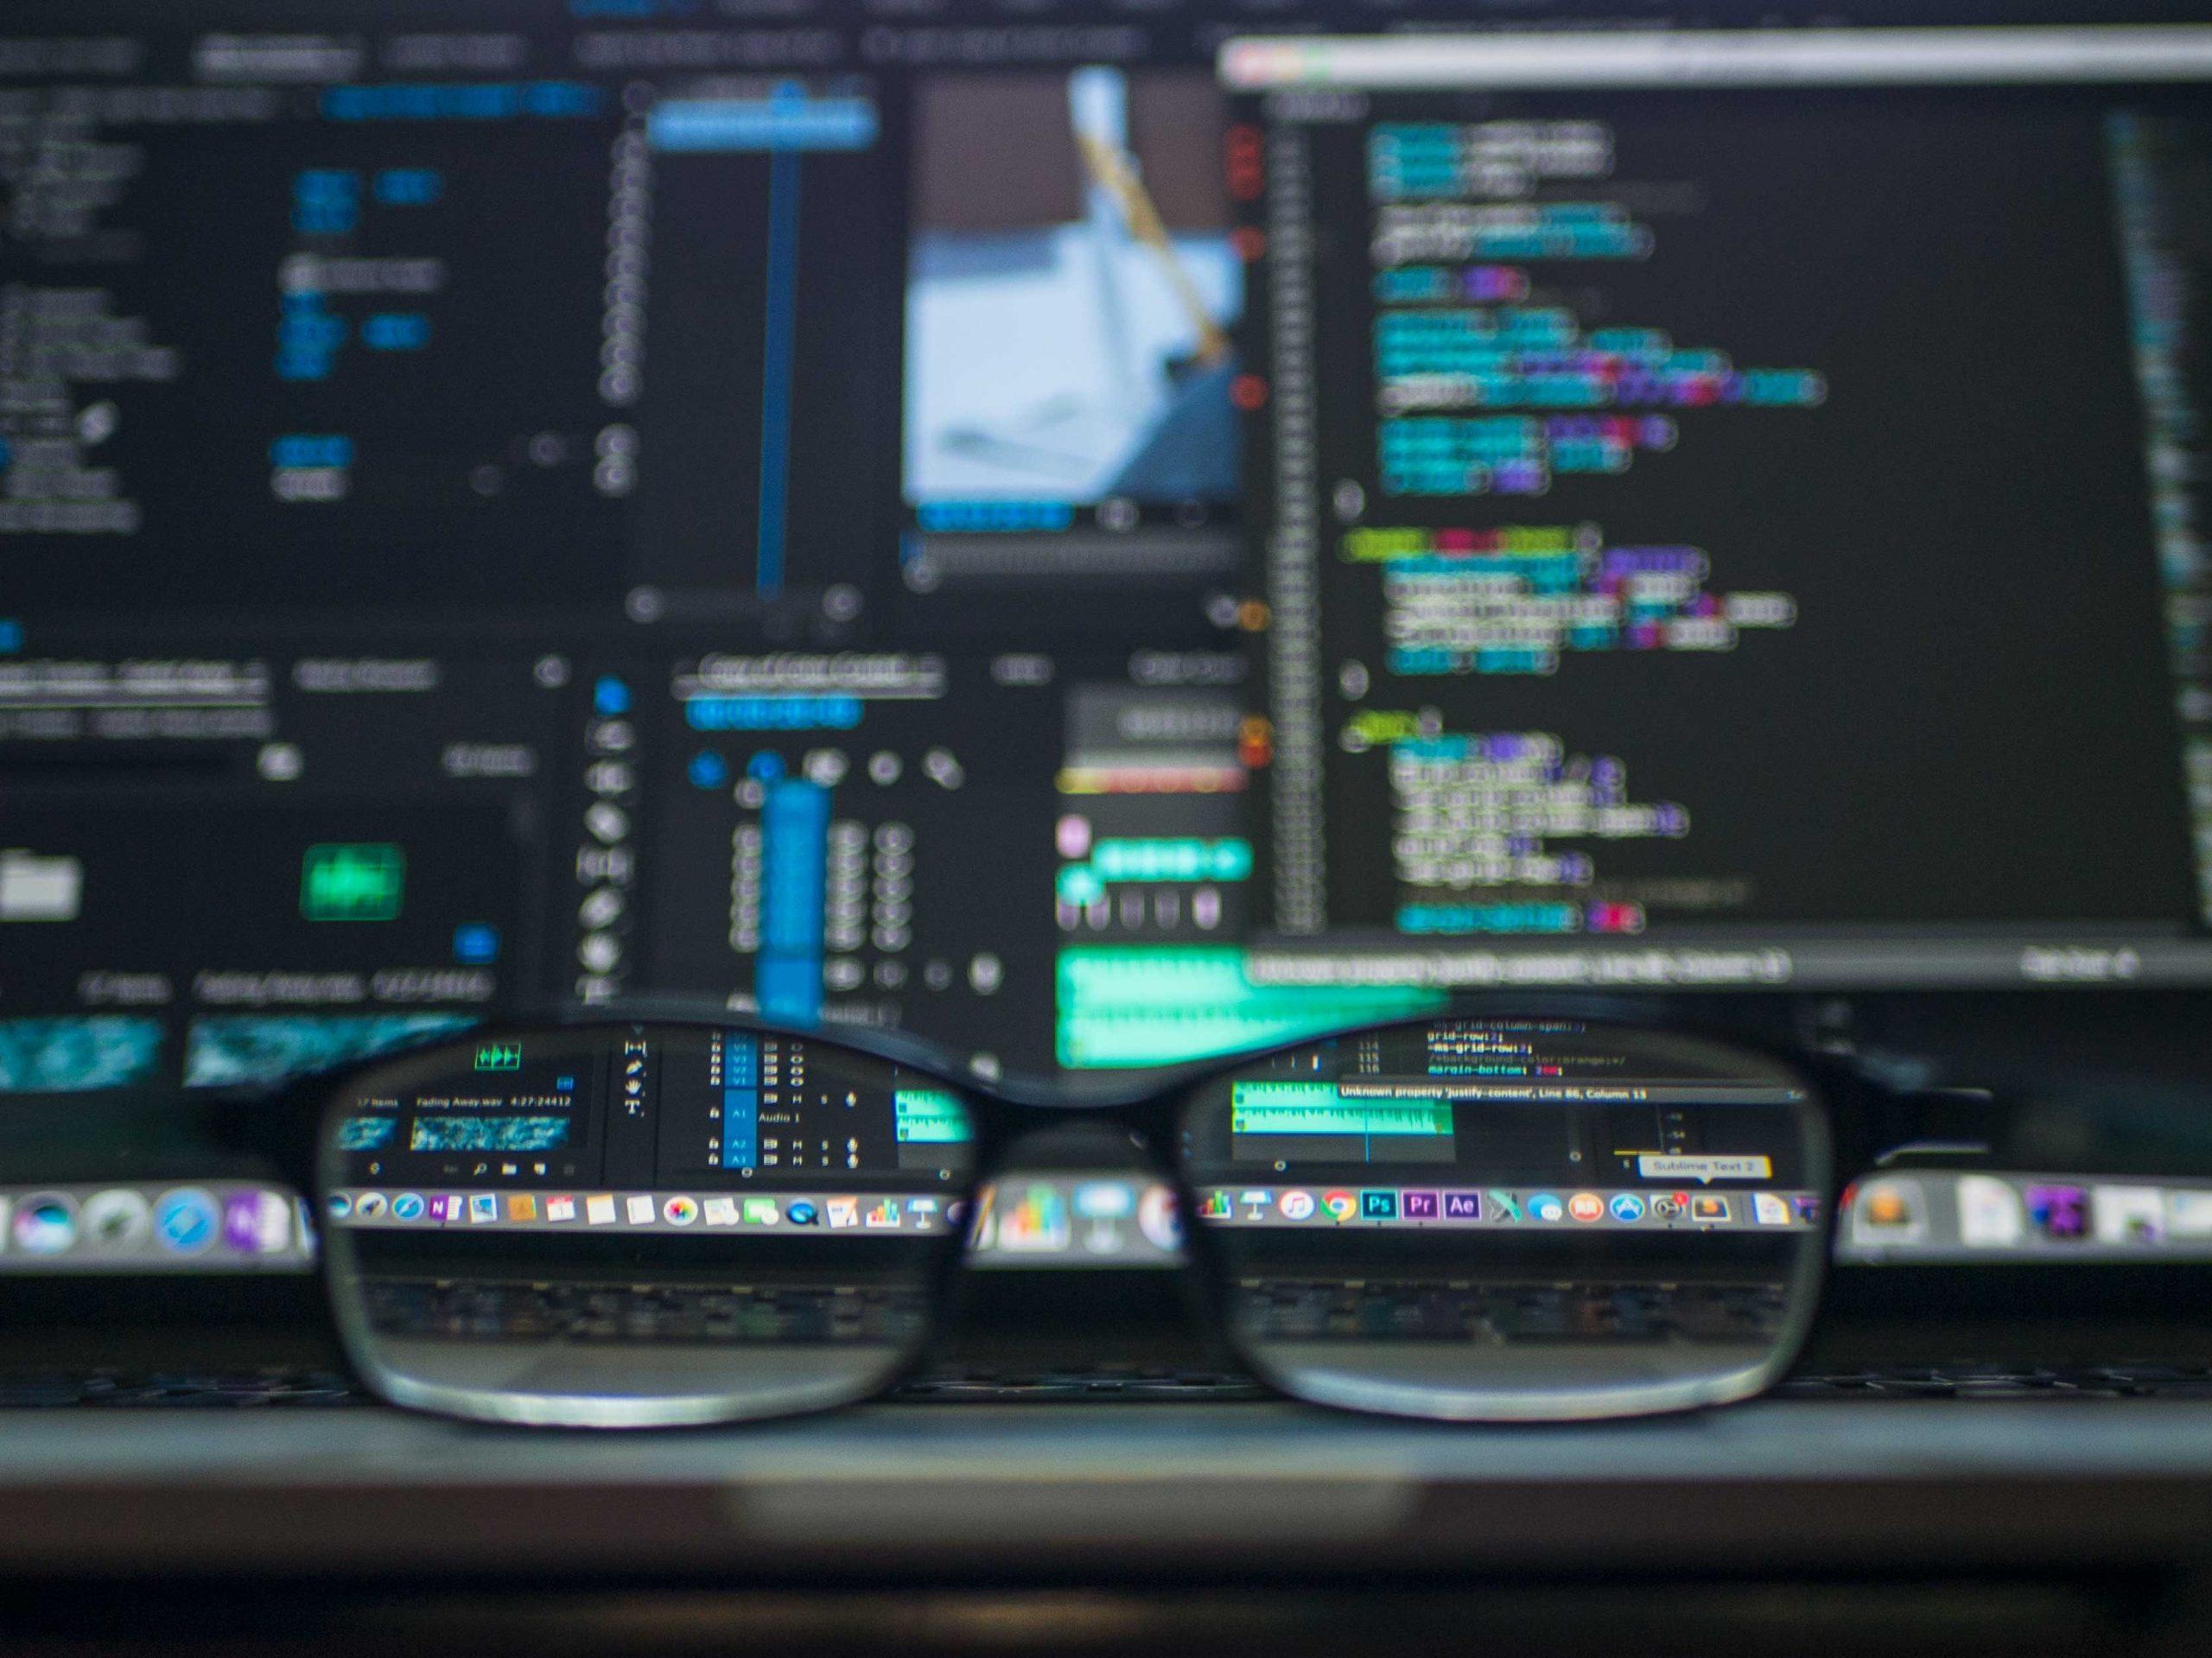 Glasses in front of software quality testing data on computer screen